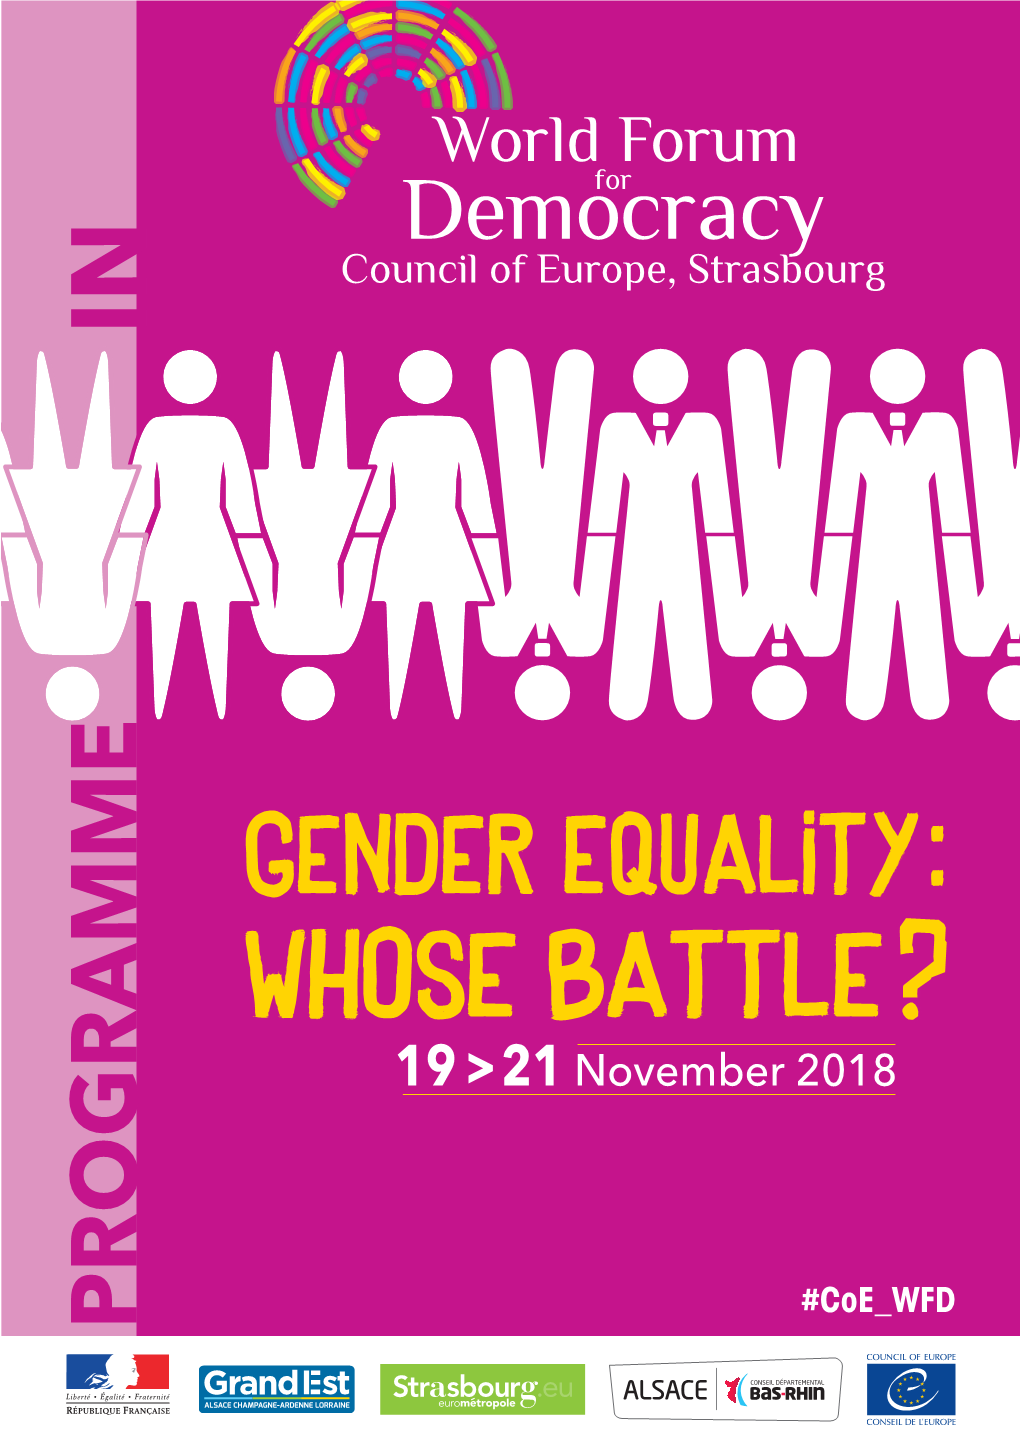 Gender Equality฀ Council Ofeurope, Strasbourg 19 > 21